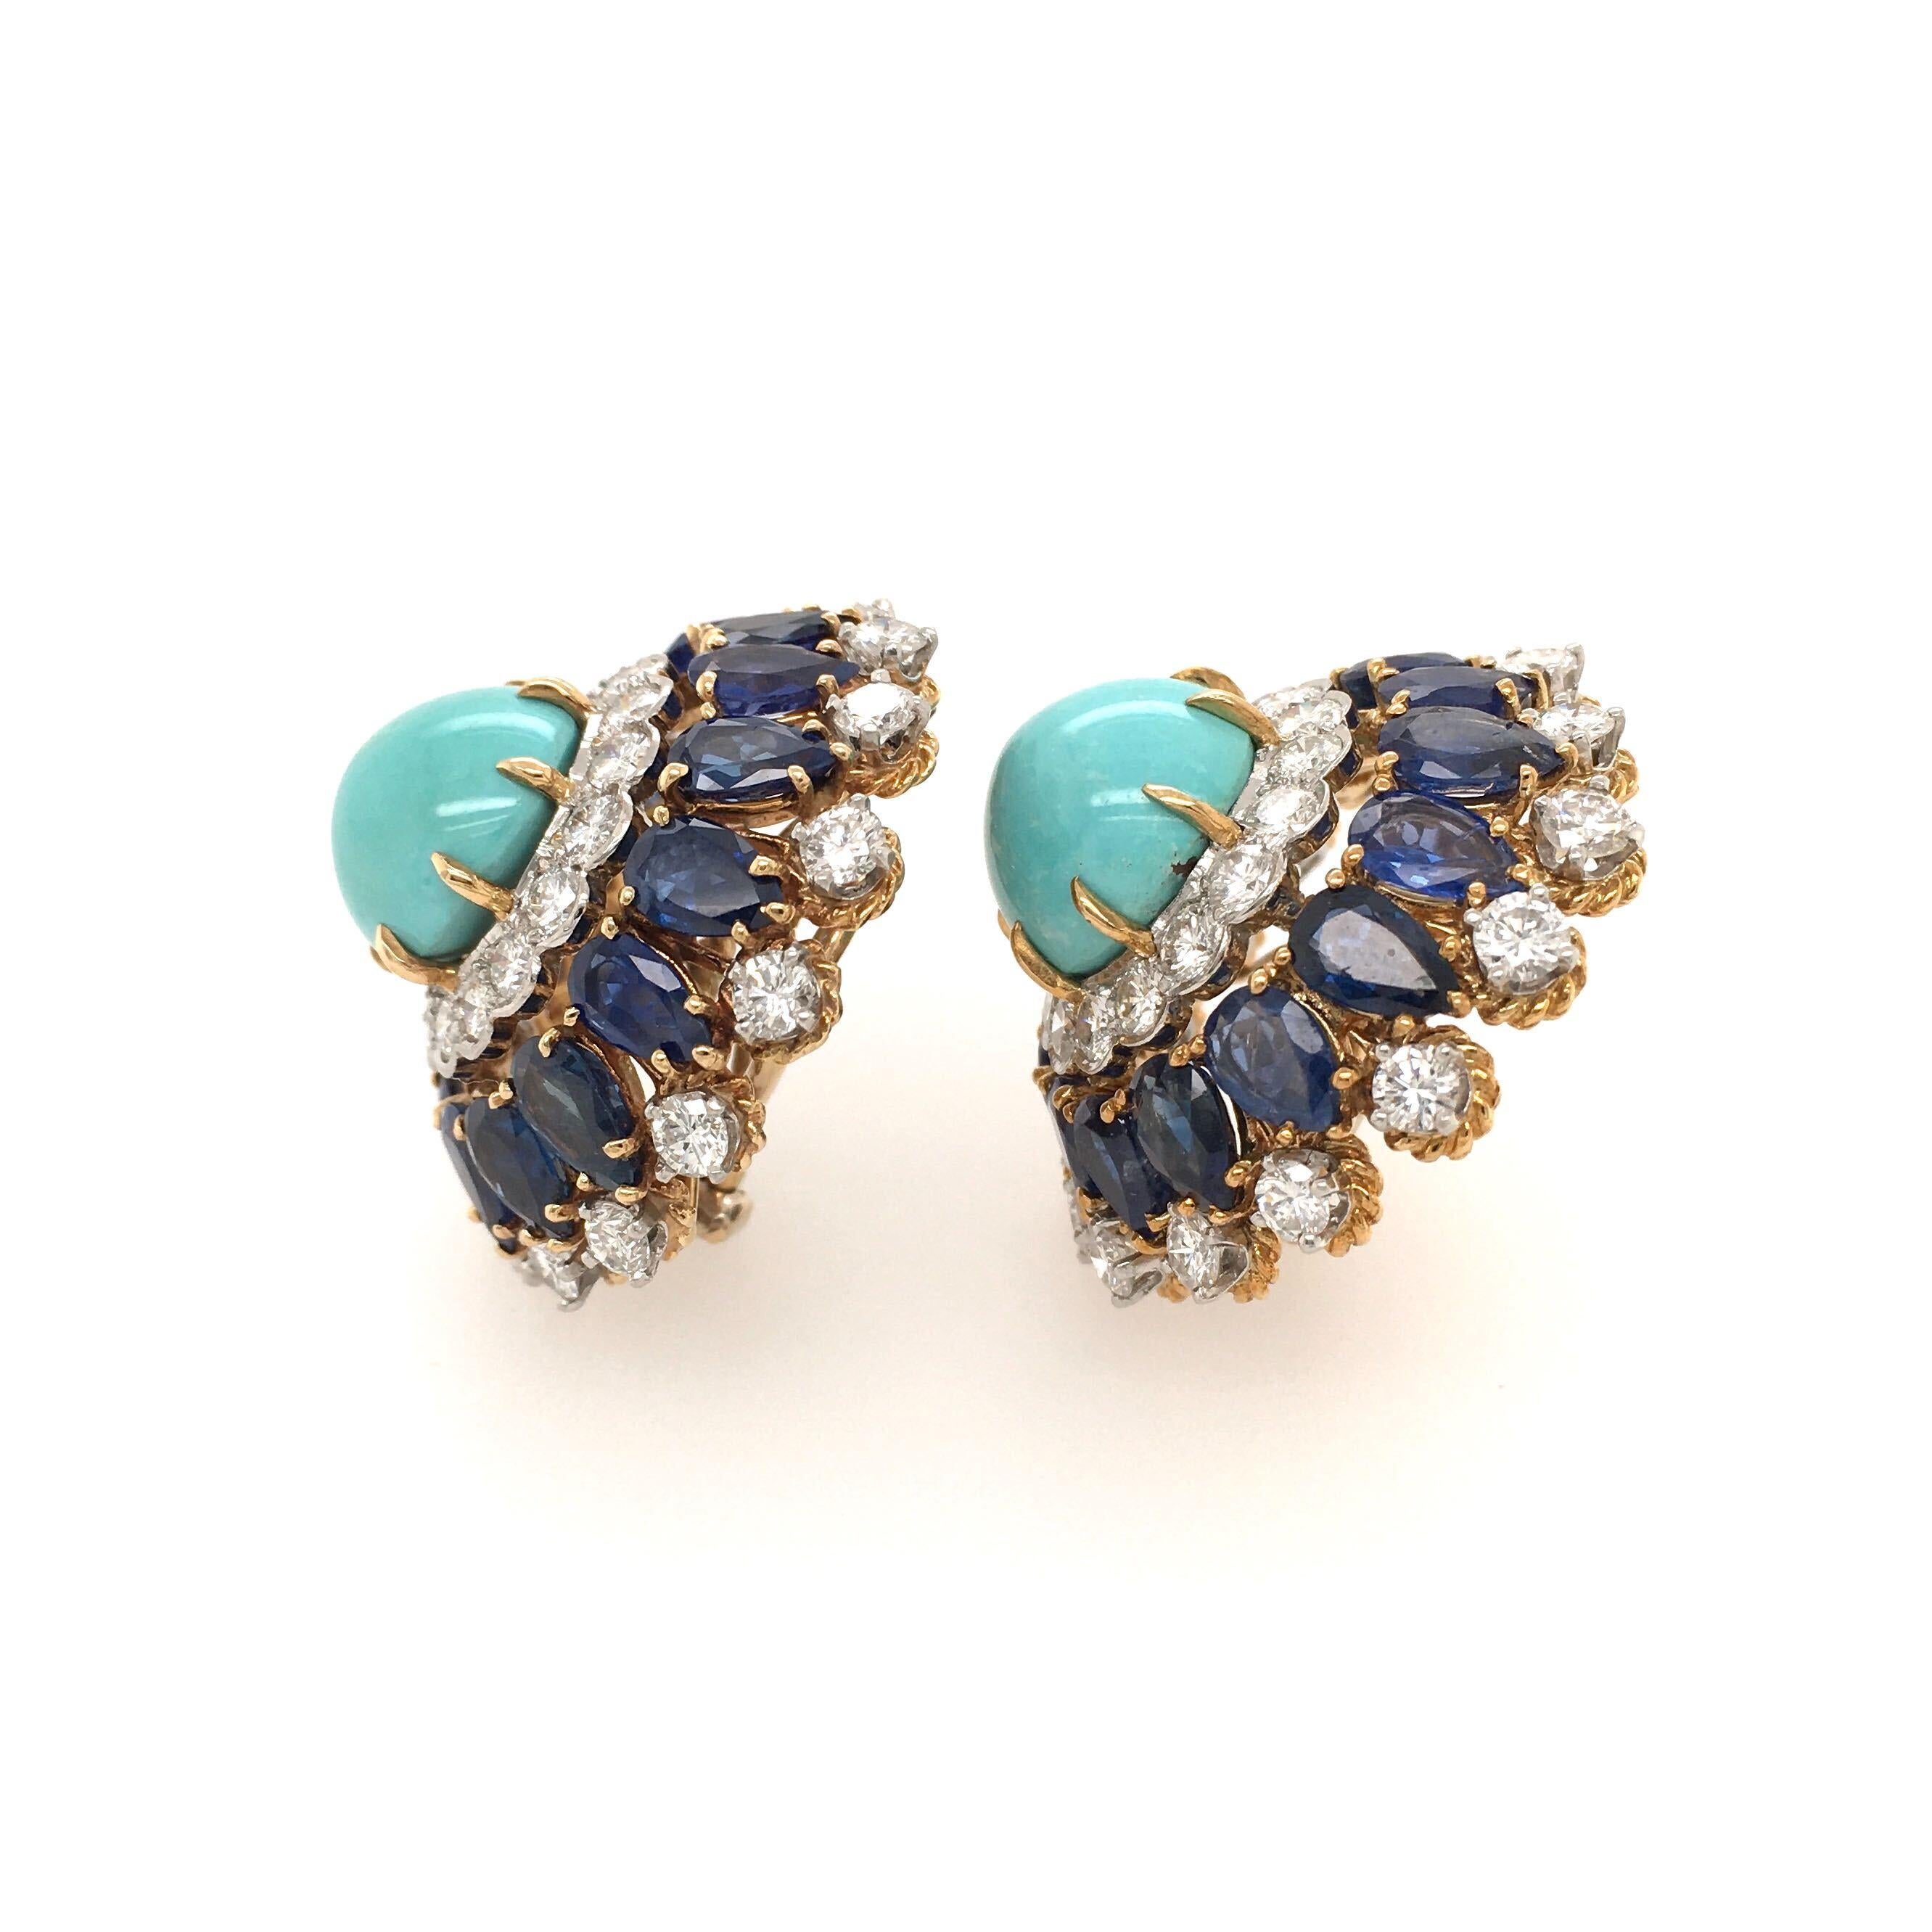 A pair of 18 karat yellow gold, turquoise, sapphire and diamond earrings. Set with a round cabochon turquoise, measuring approximately 12.5mm, within a circular cut diamond and pear shaped sapphire surround. Sixty two (62) diamonds weigh